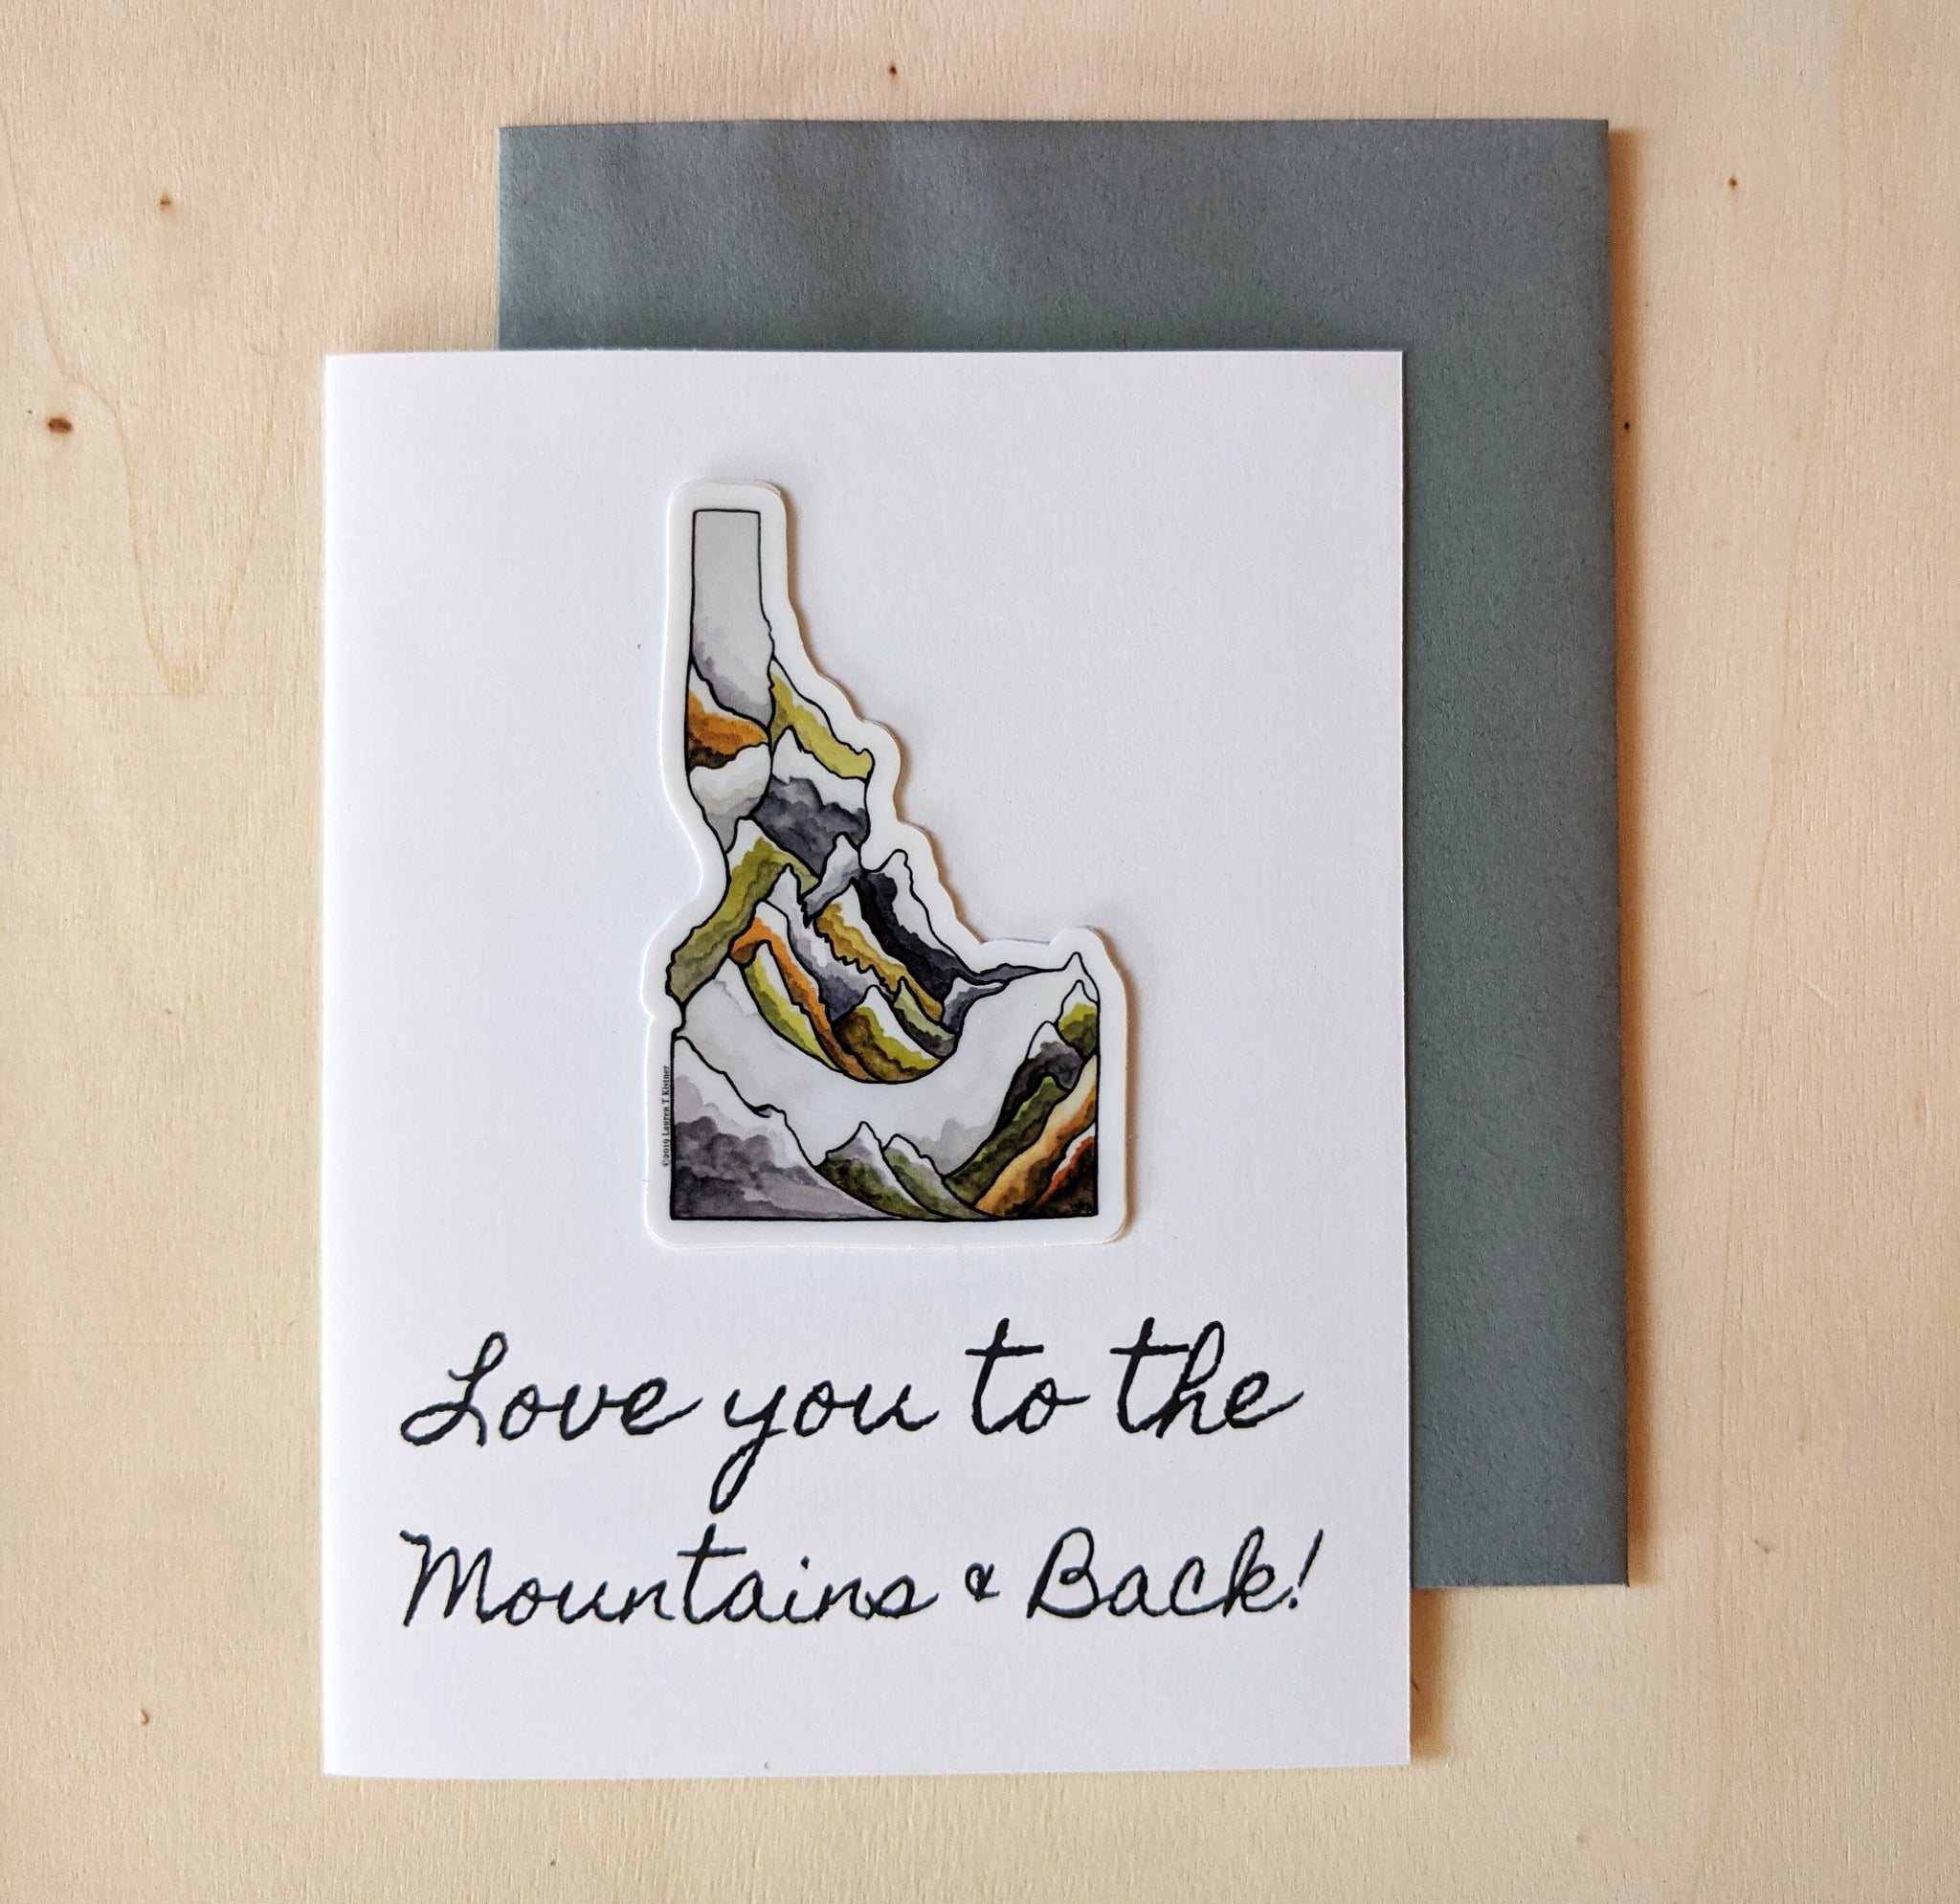 Lauren T Kistner Arts Card + Sticker "Love You to the Mountains and Back!"